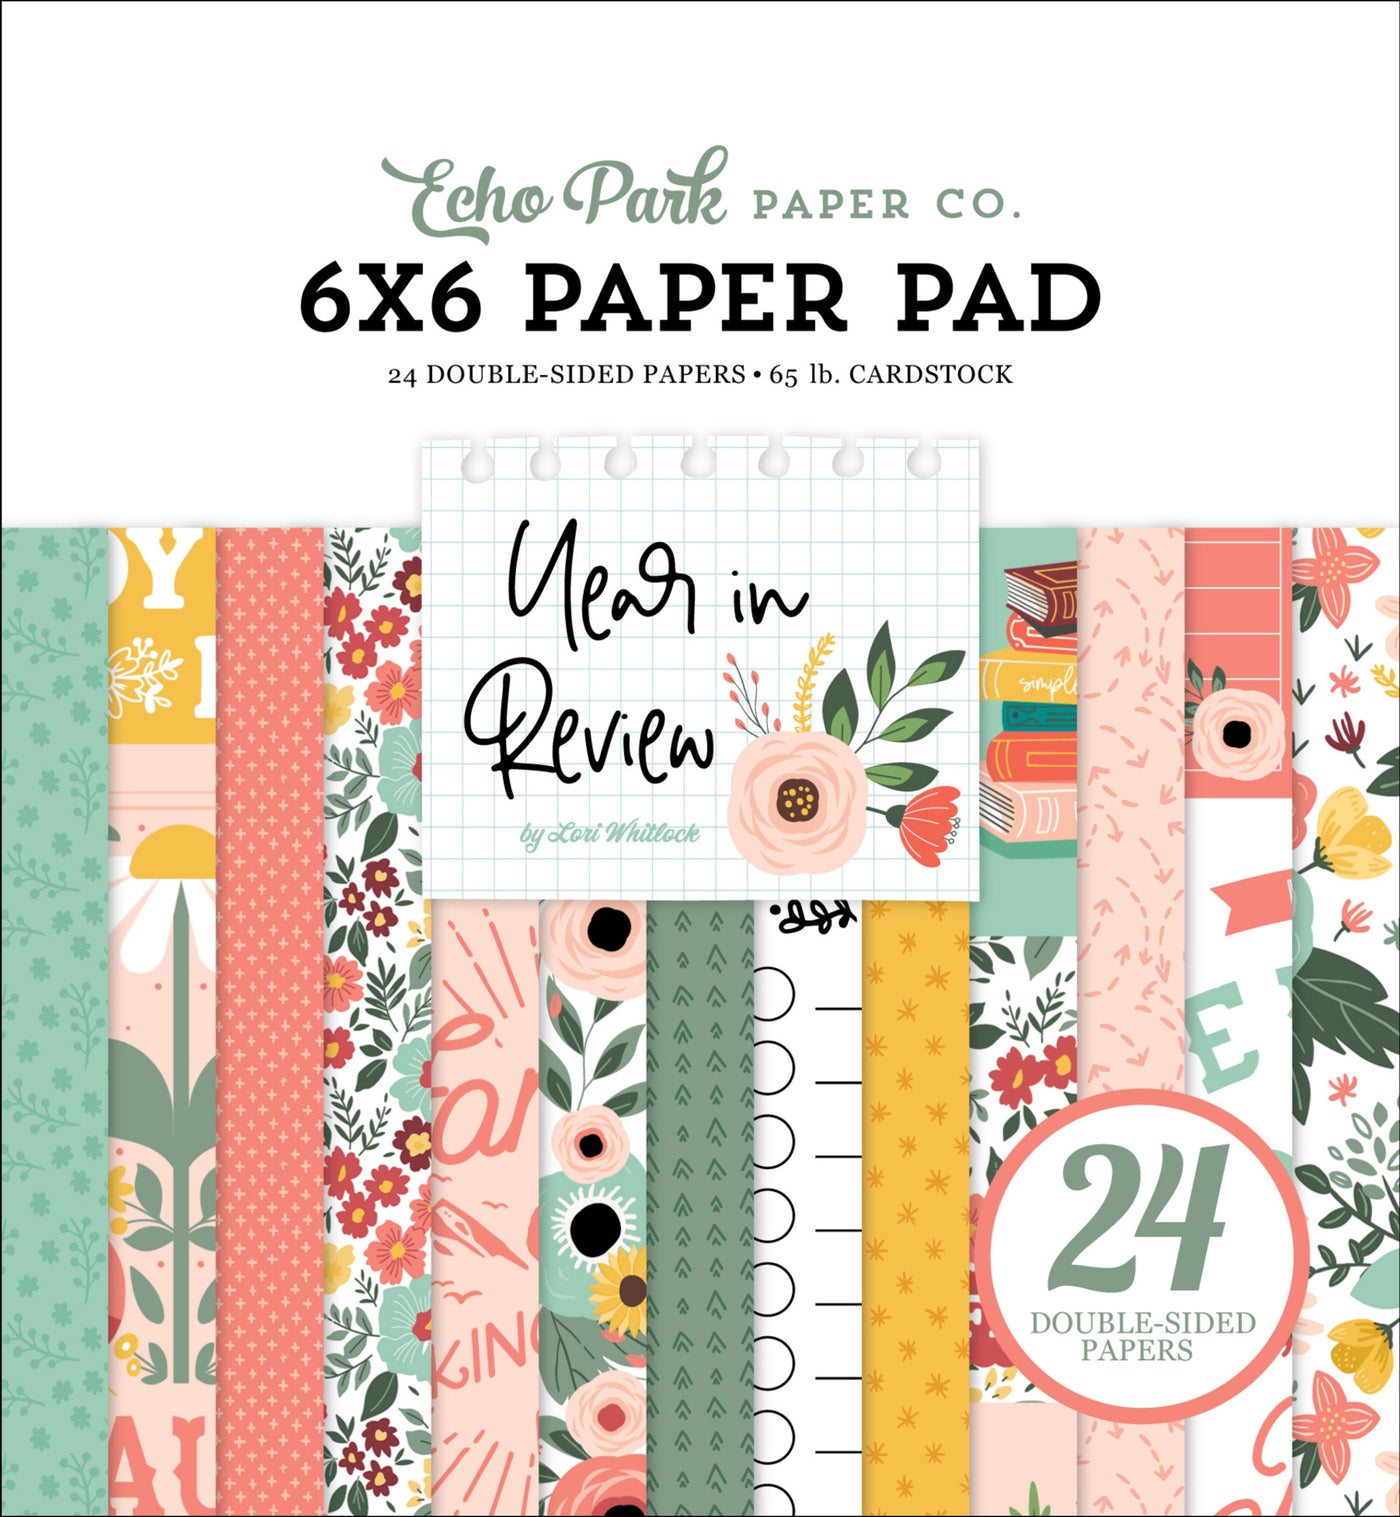 Tell your unique story with this 6x6 pad with 24 double-sided pages for cards and paper crafting. The printed pad coordinates with the YEAR IN REVIEW Collection Kit by Echo Park Paper.